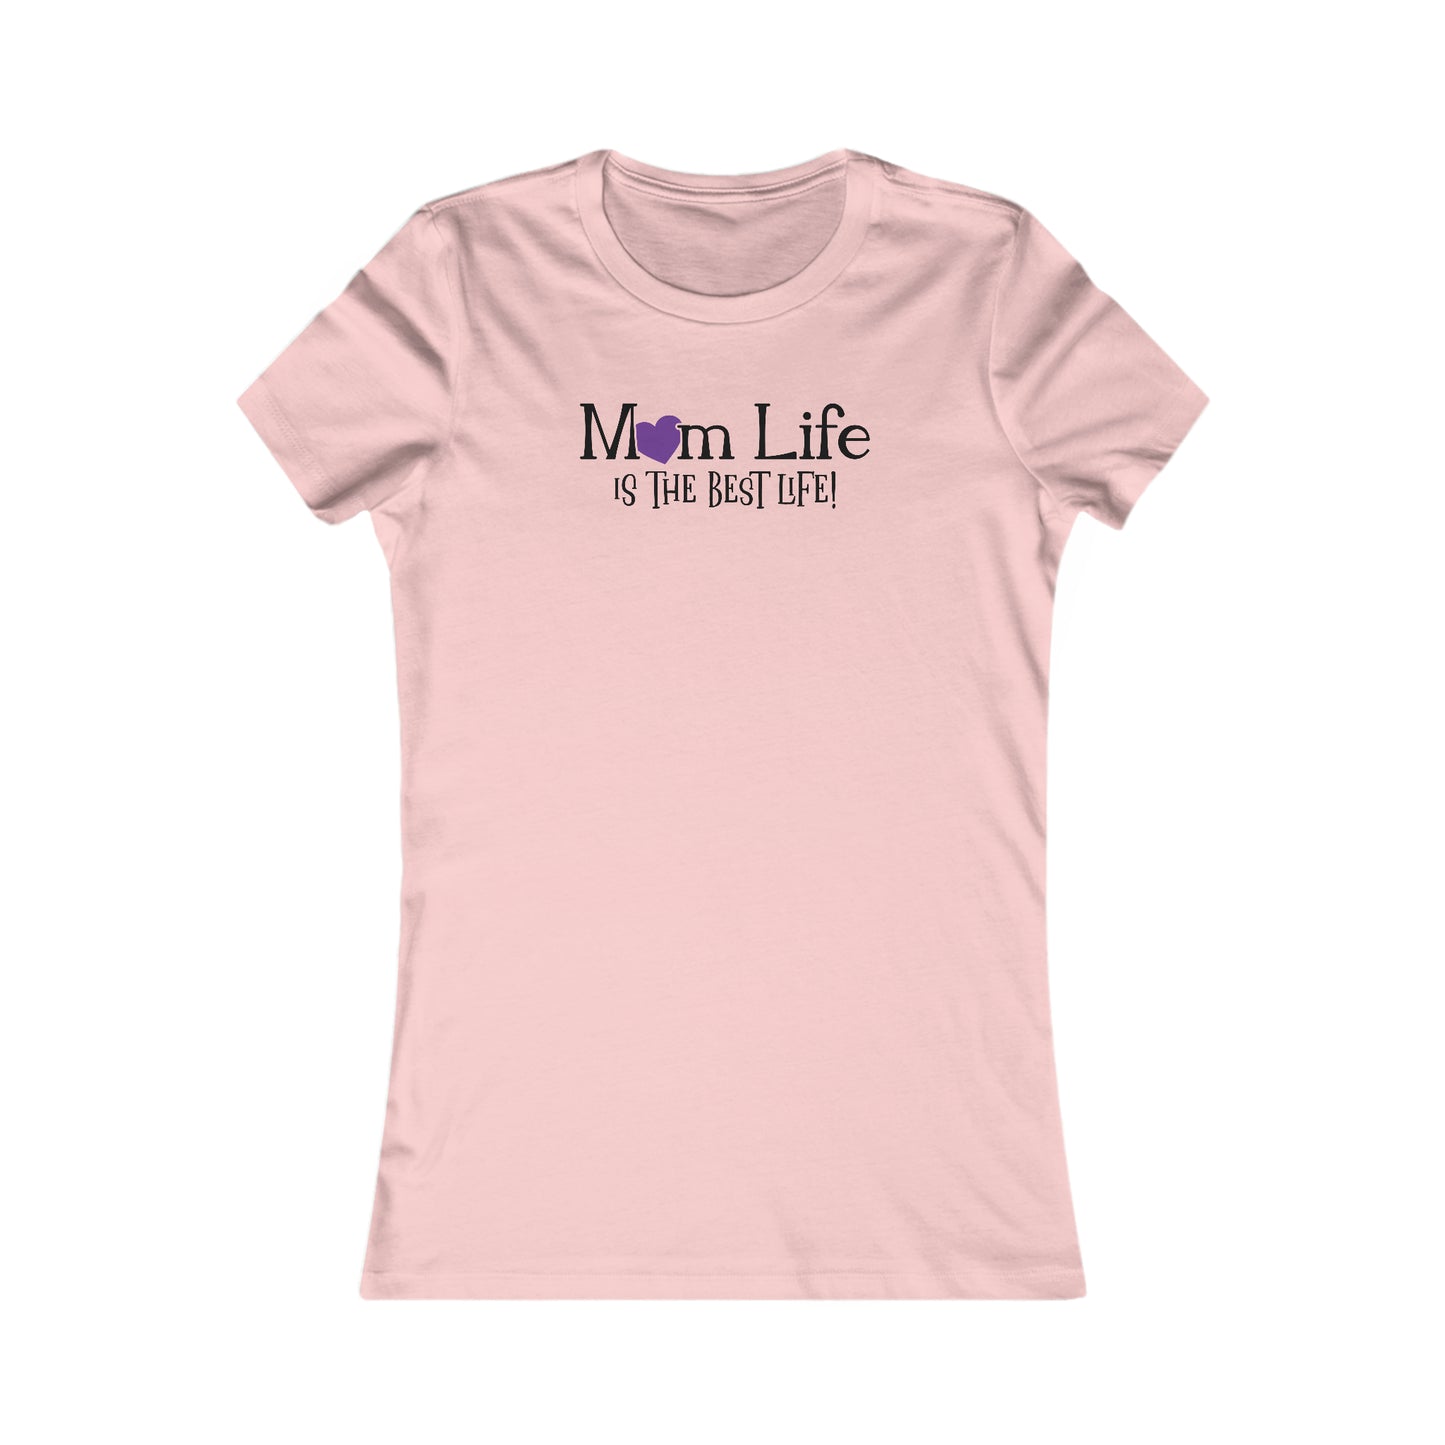 Mom Life is the Best Life! - Best Mom - Celebrate Mom - Strong Woman - Mom Humor - Women's Favorite Tee